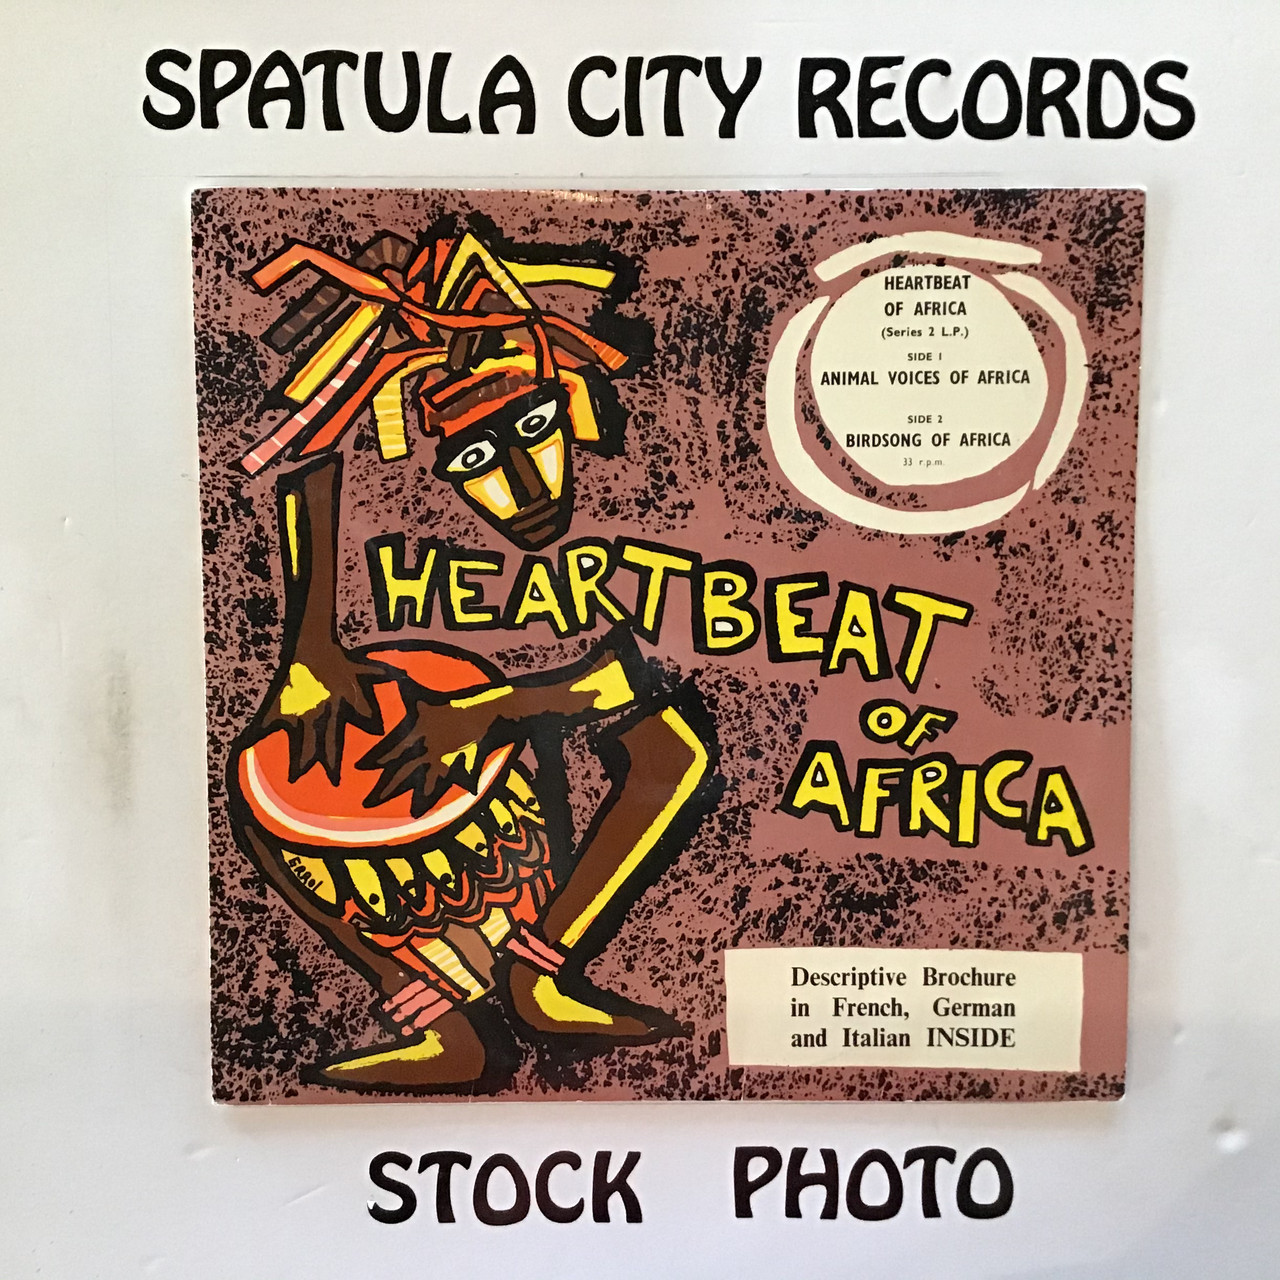 Heartbeat of Africa - Animal Voices of Africa/Birdsong of Africa - IMPORT - vinyl record LP